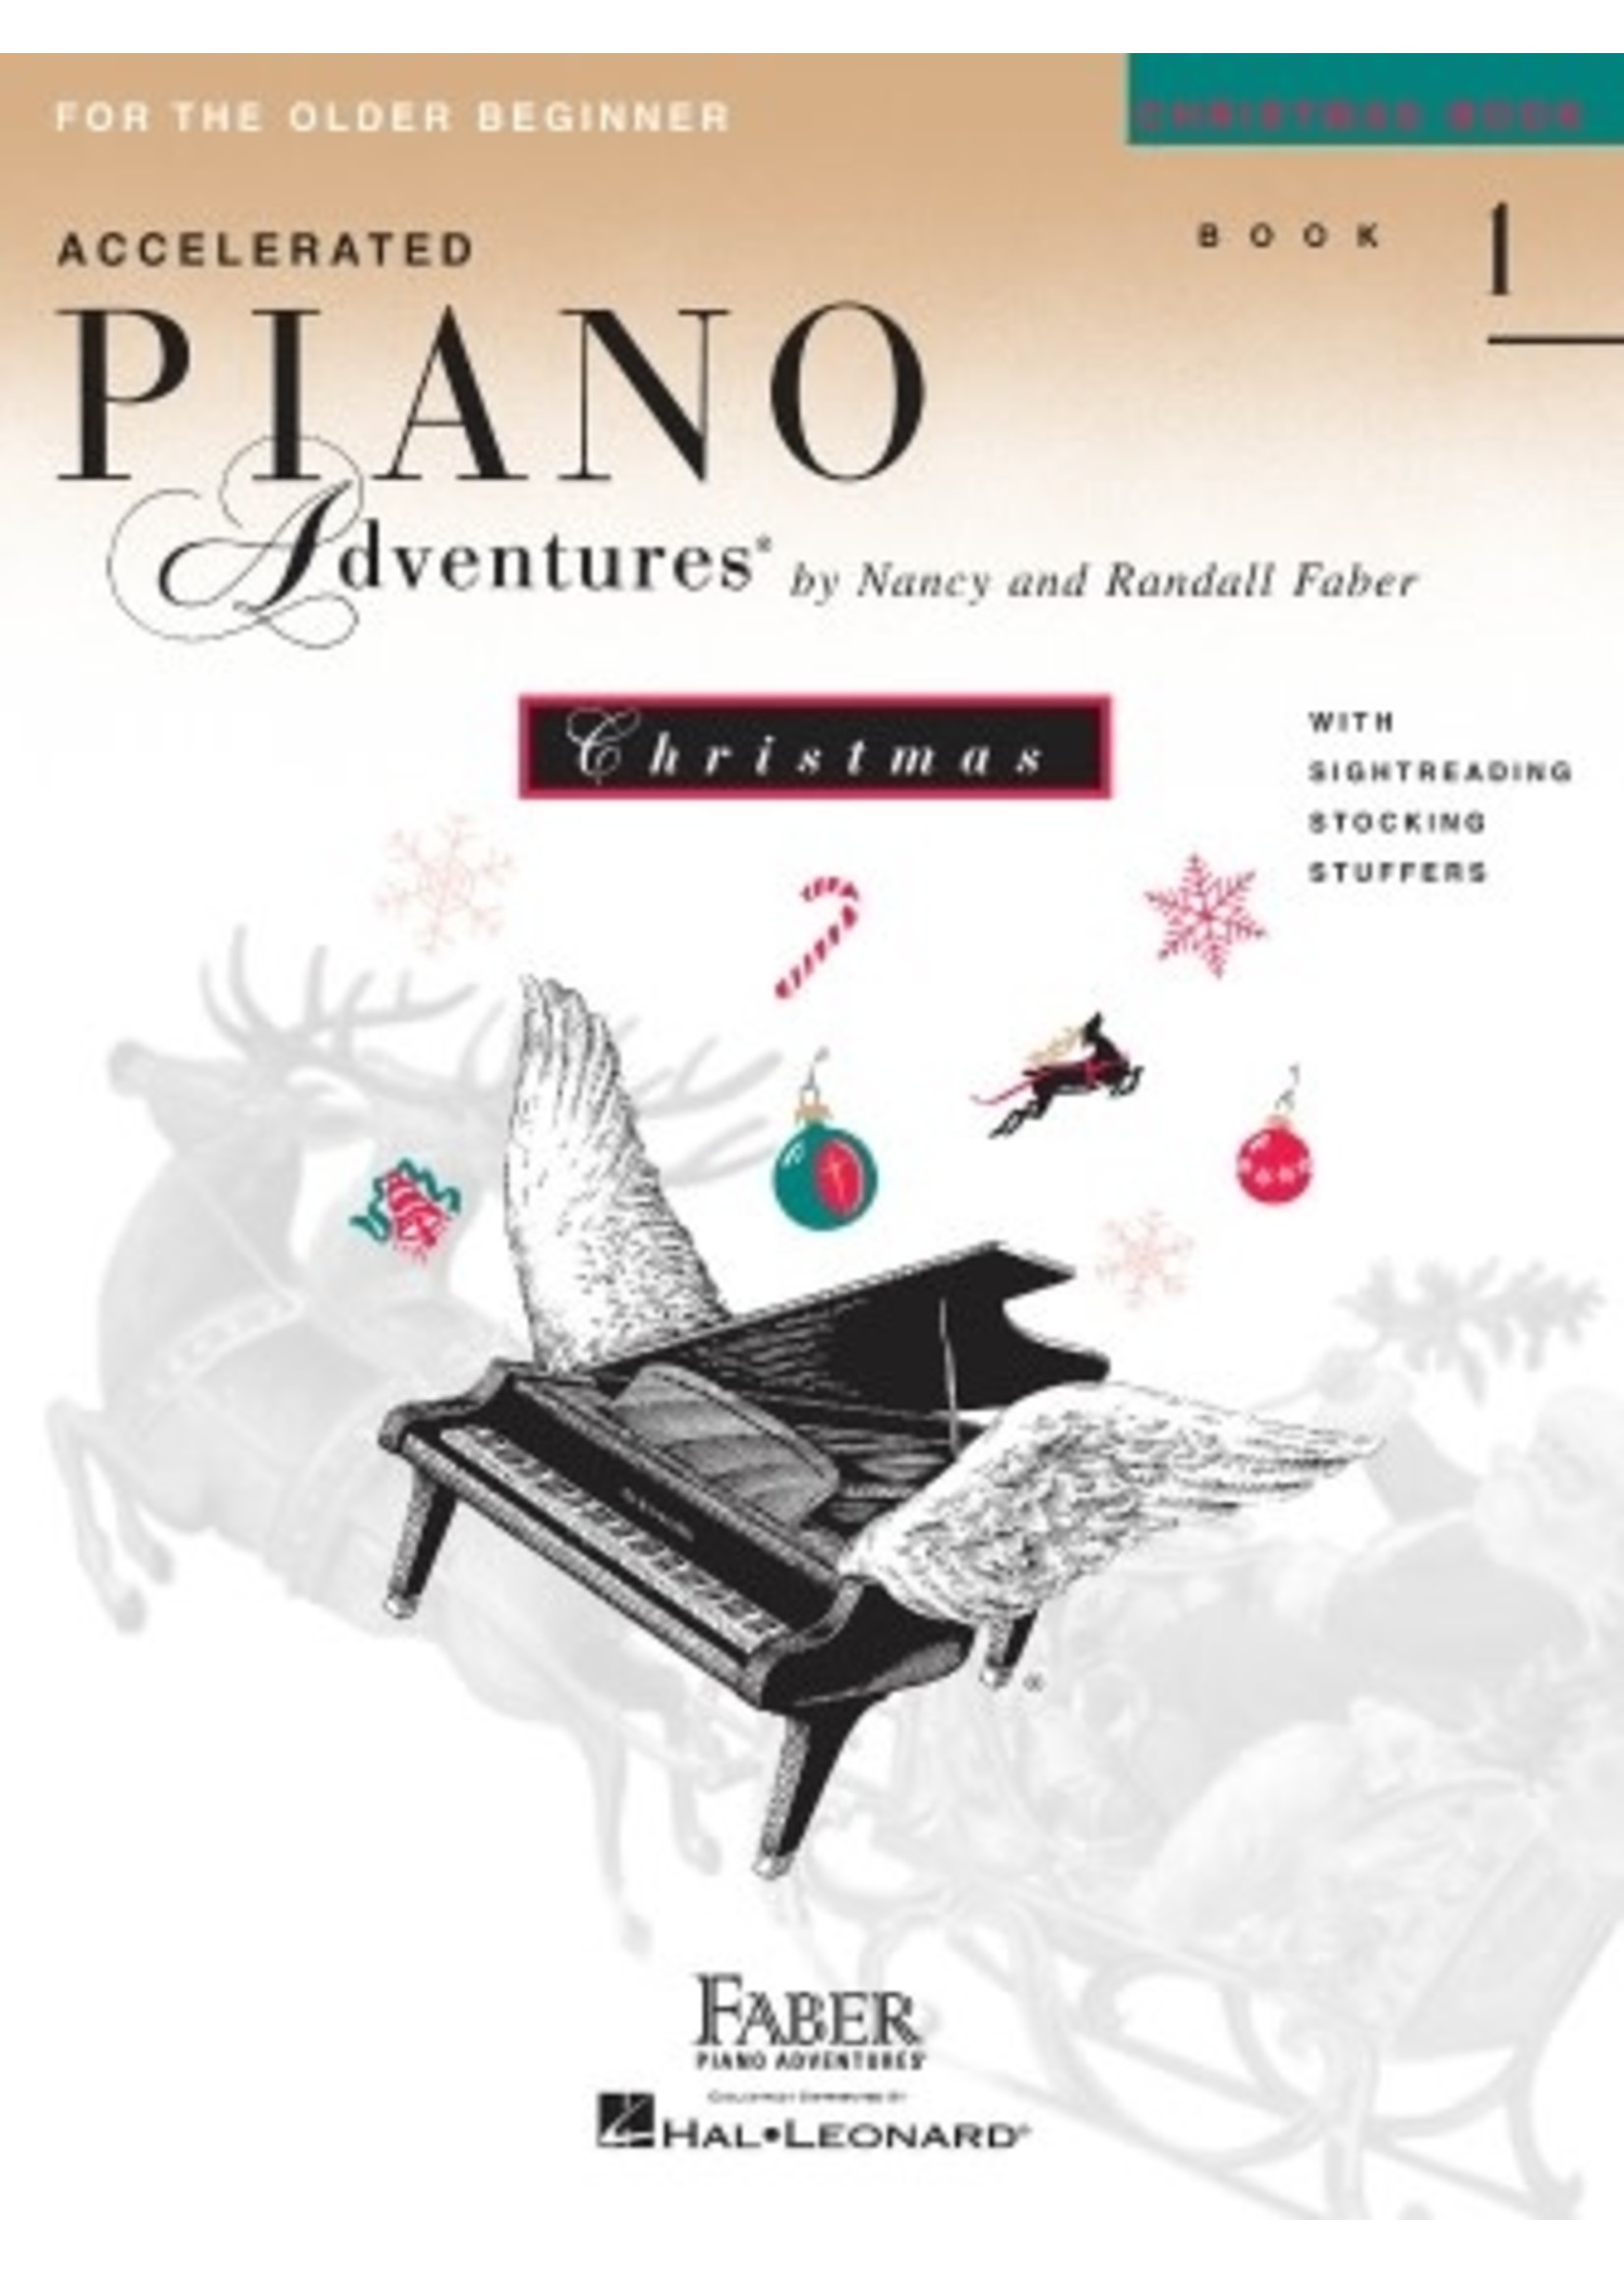 Hal Leonard Faber Accelerated Piano Adventures for the Older Beginner Christmas Book 1